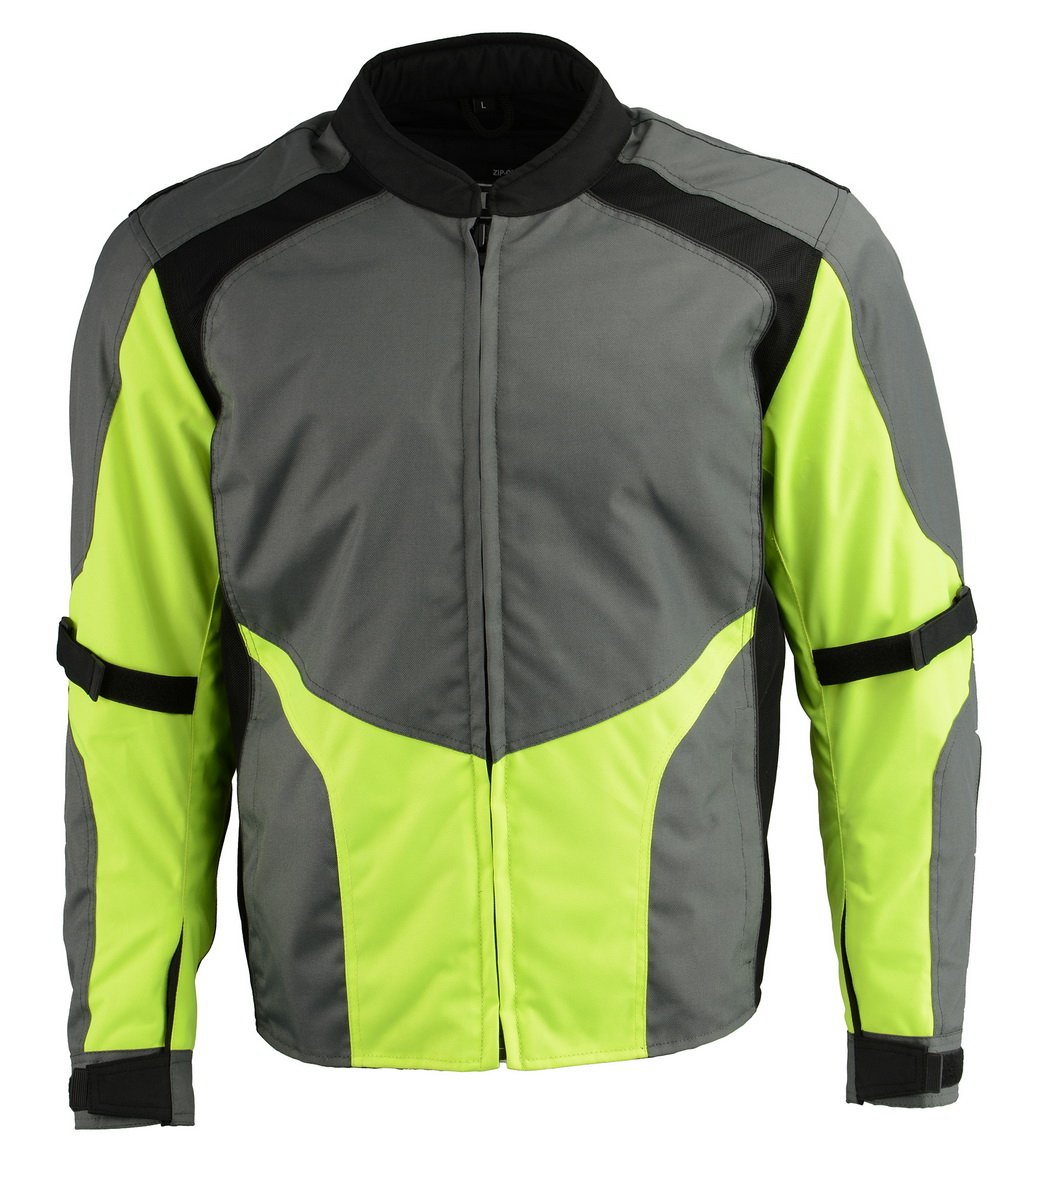 M Boss Motorcycle Apparel BOS11706 Men's Grey/Hi-Vis Green Nylon Motorcycle Racer Jacket with Armor Protection